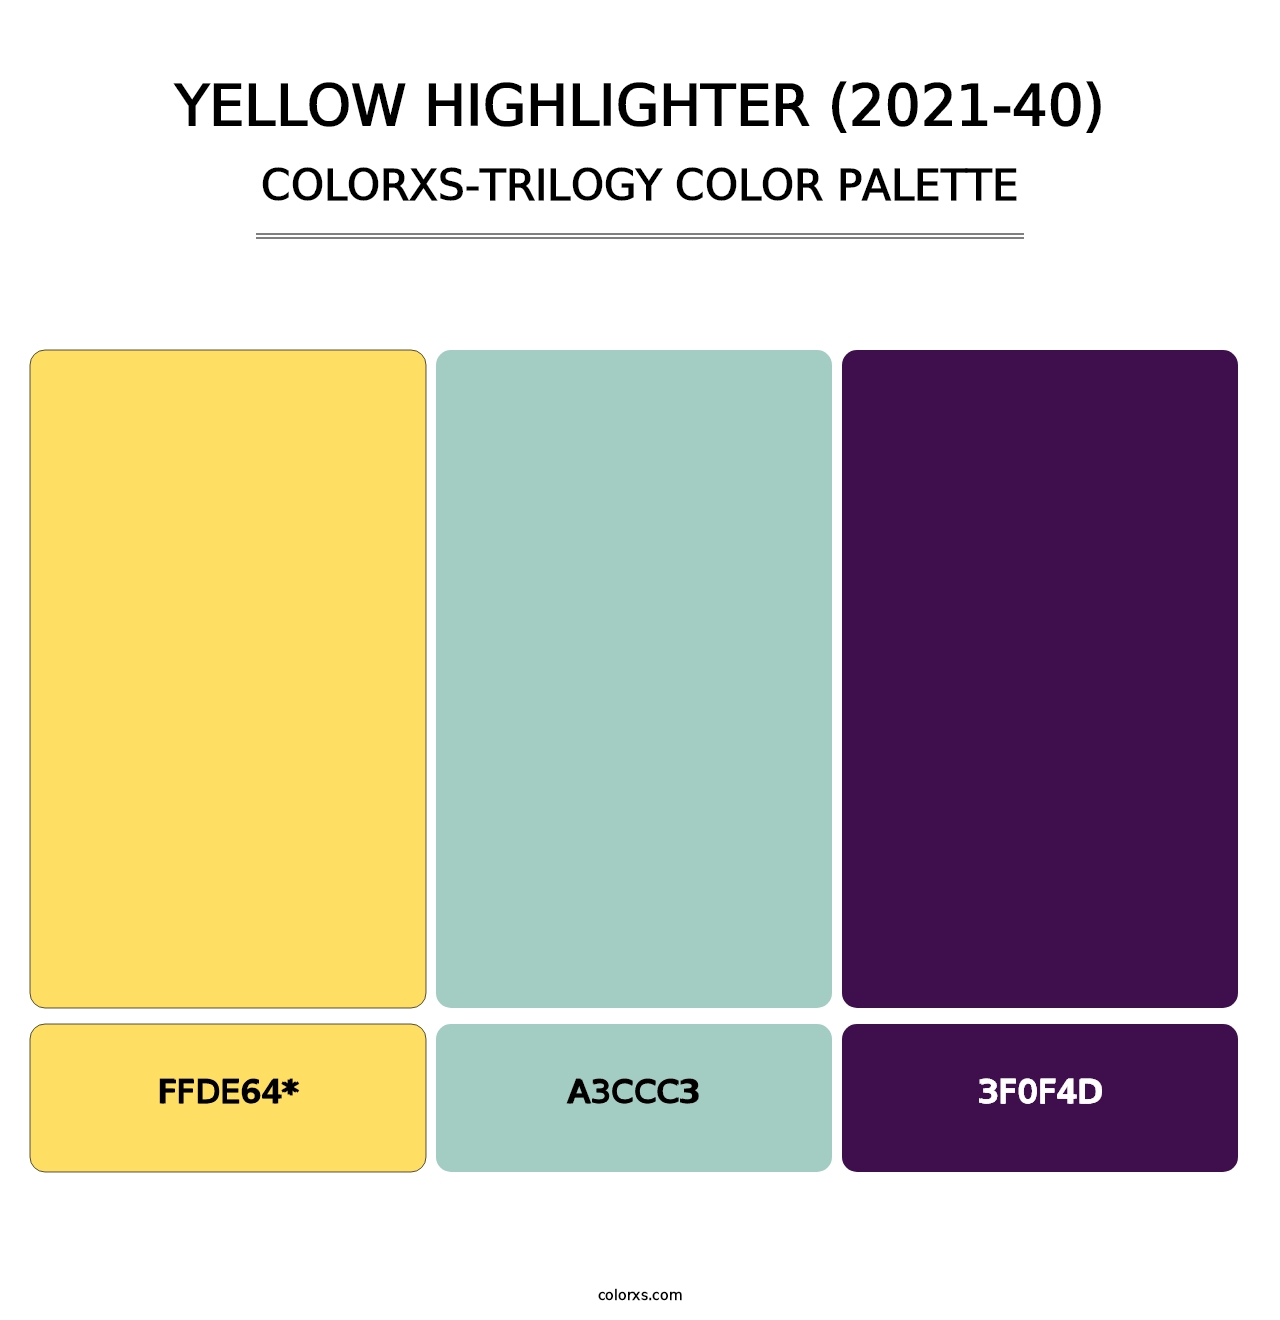 Yellow Highlighter (2021-40) - Colorxs Trilogy Palette